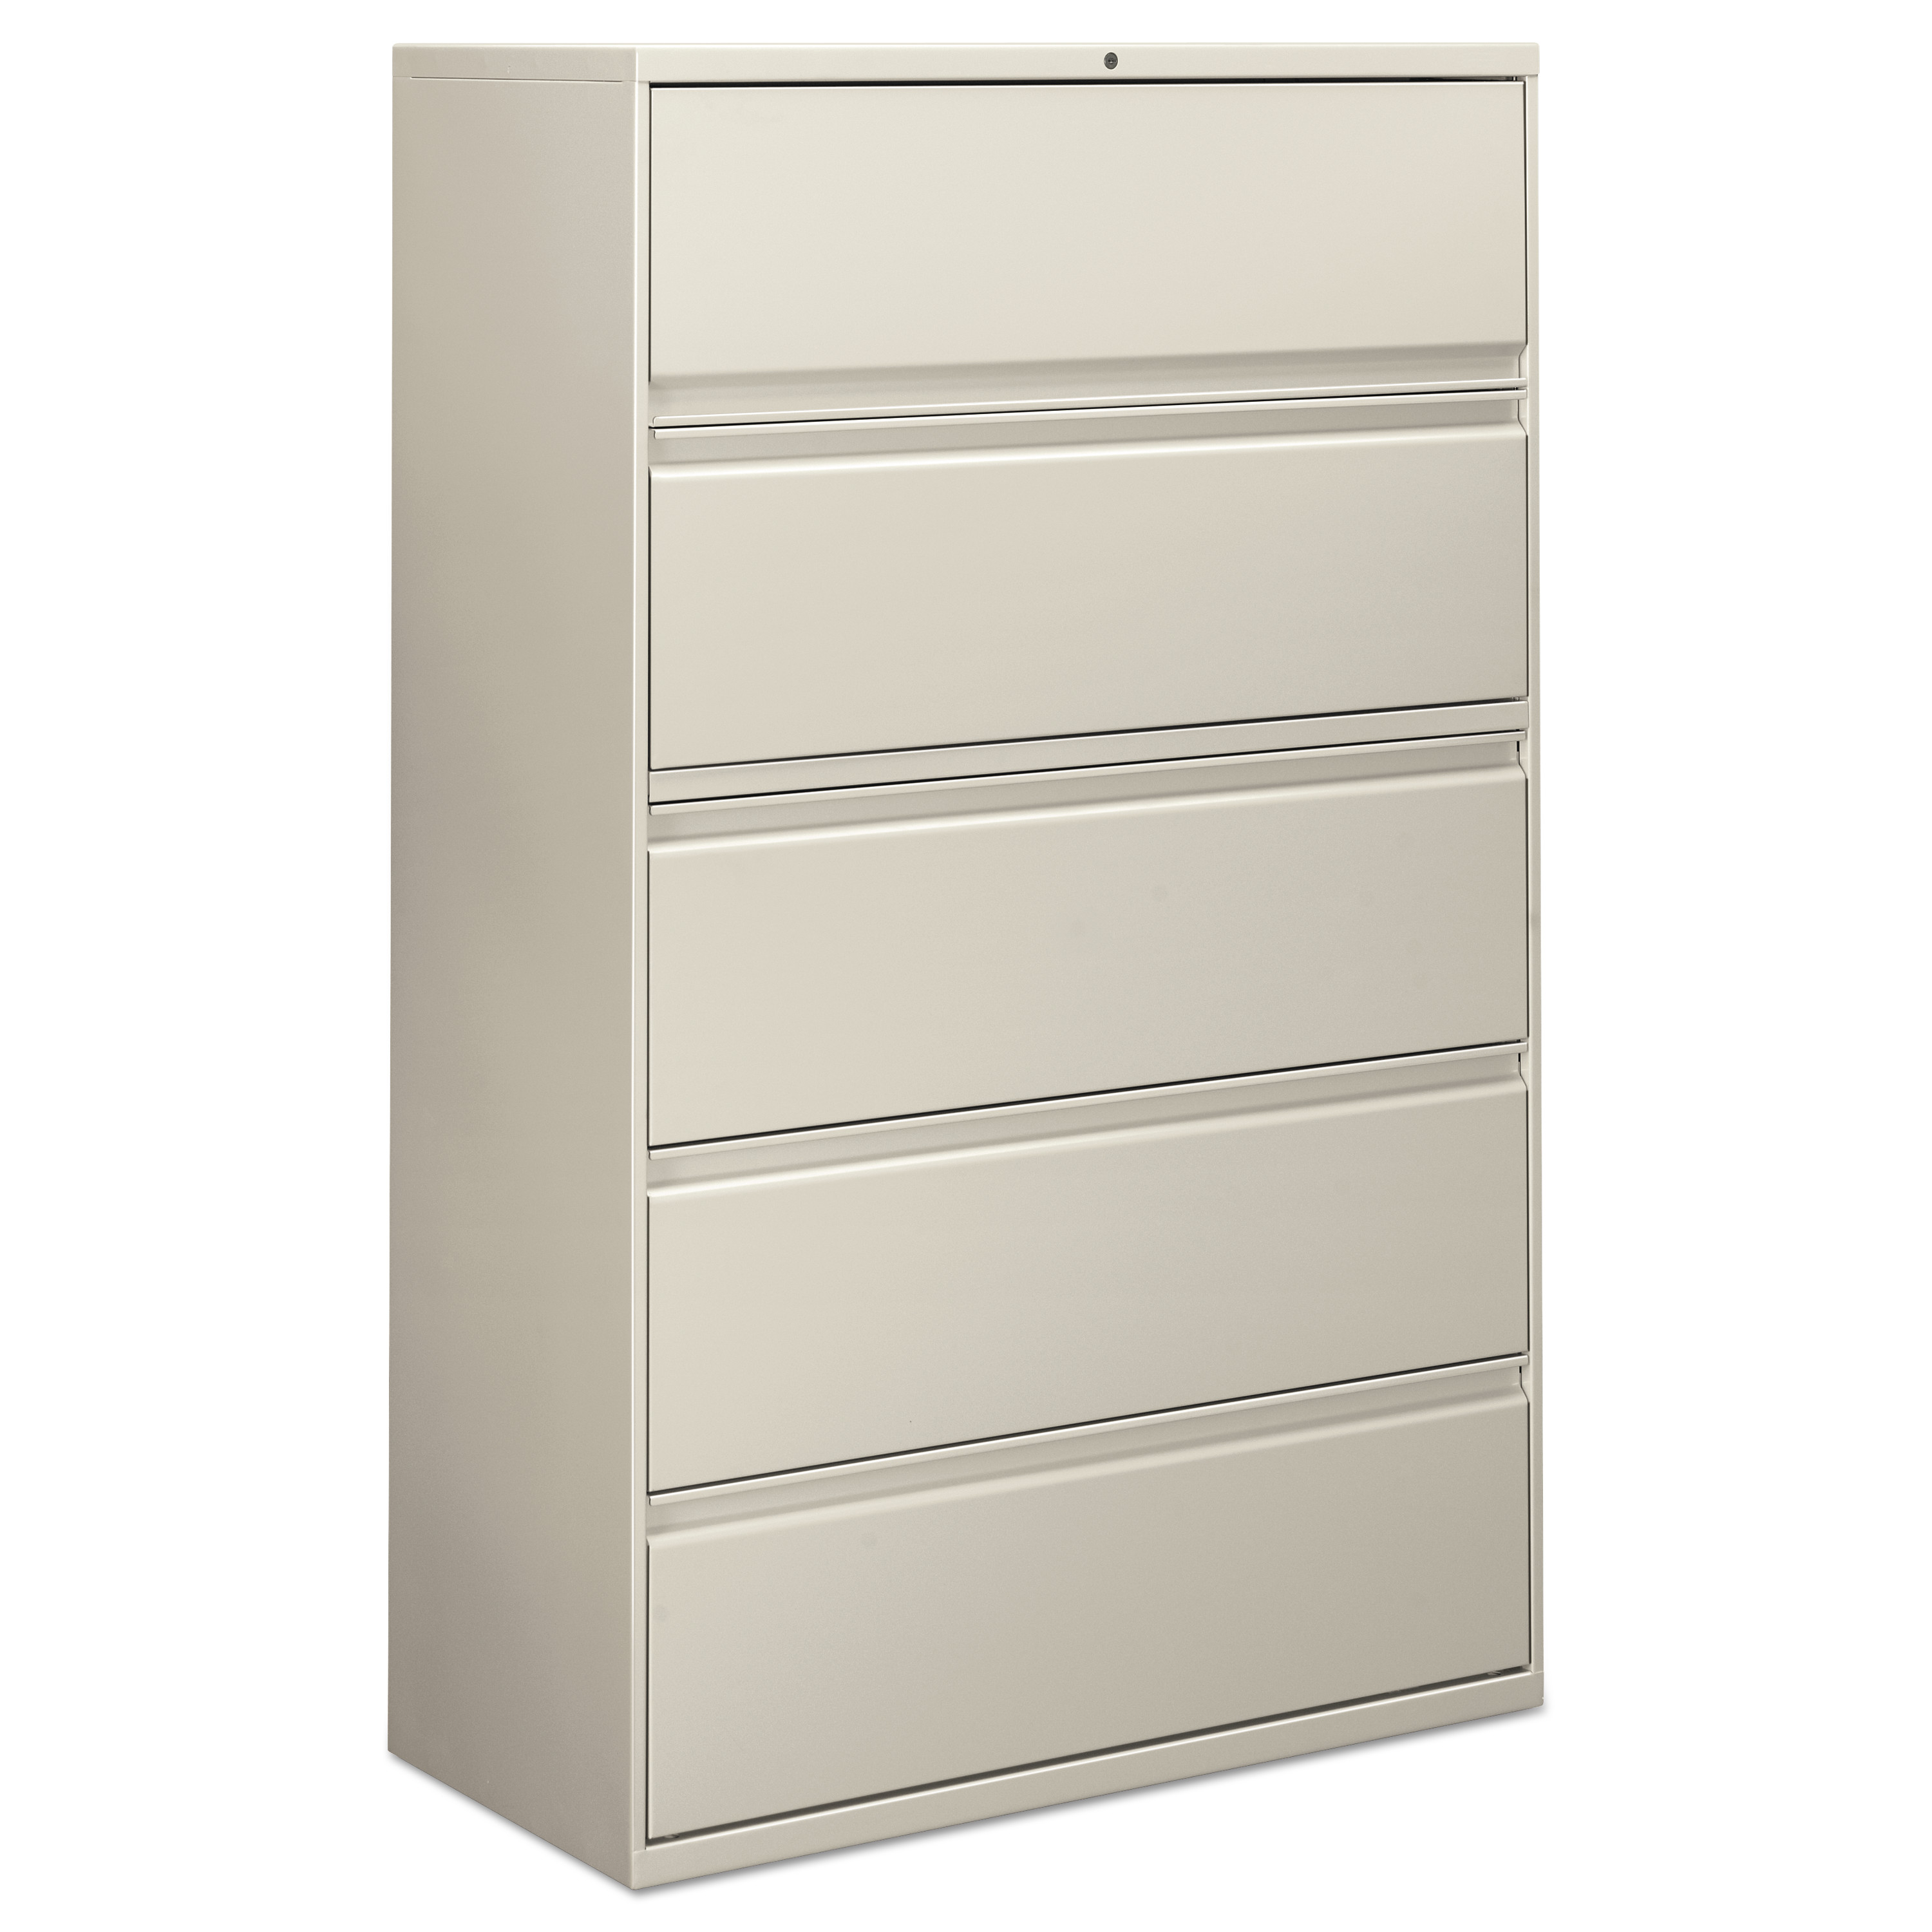 Five-Drawer Lateral File Cabinet, 42w x 18d x 64 1/4h, Light Gray